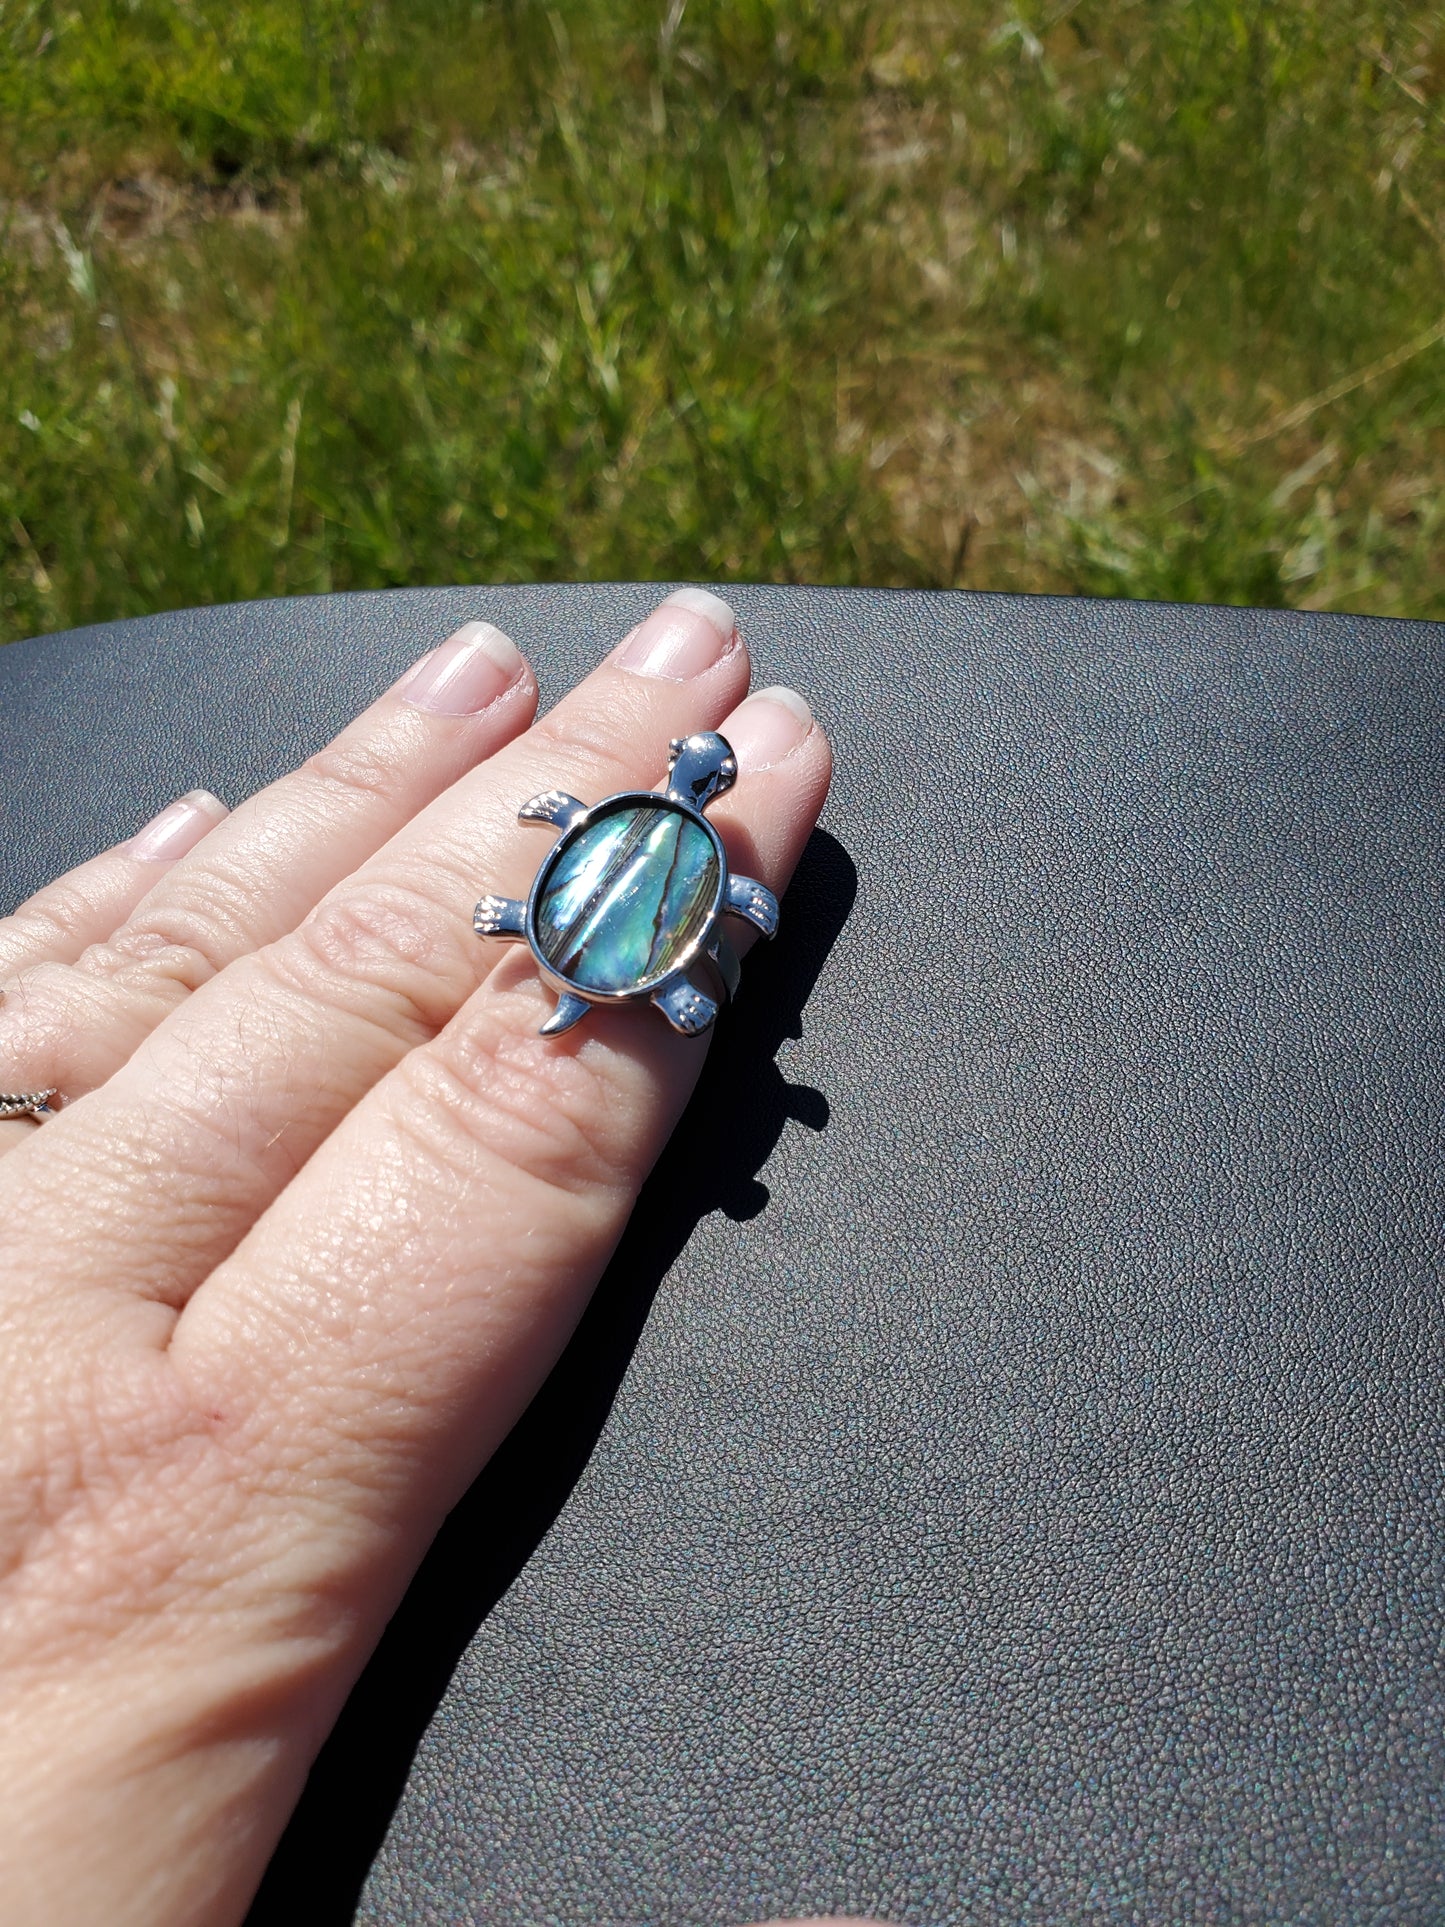 Abalone Turtle Ring